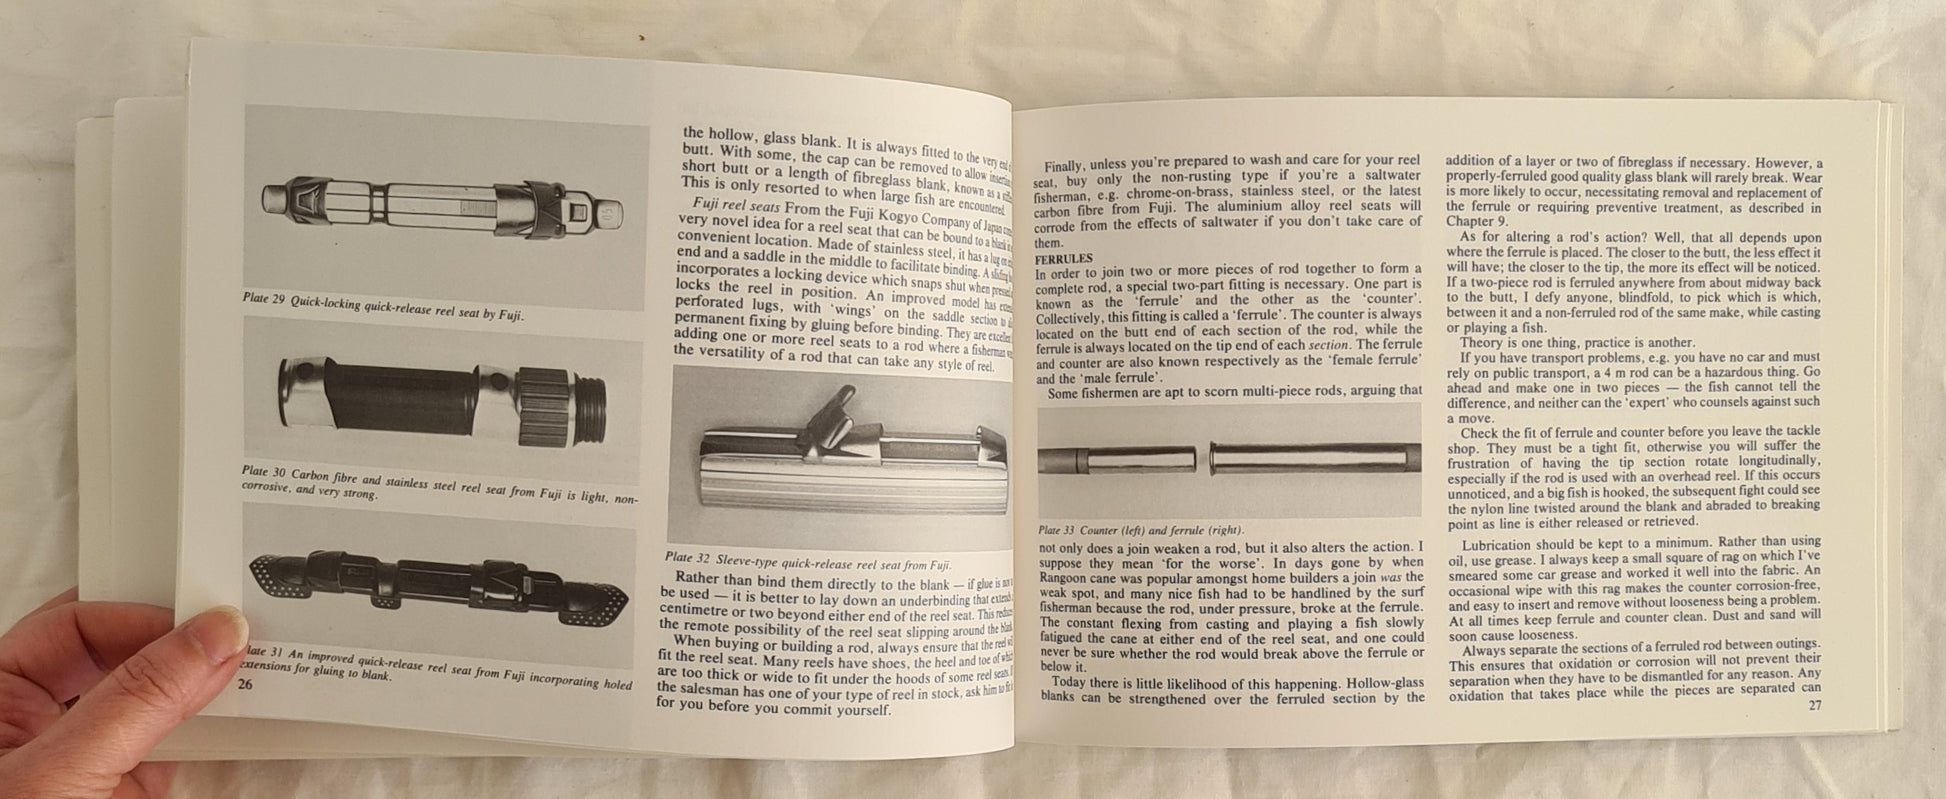 How to Build a Fishing Rod by Dick Lewers – Morgan's Rare Books